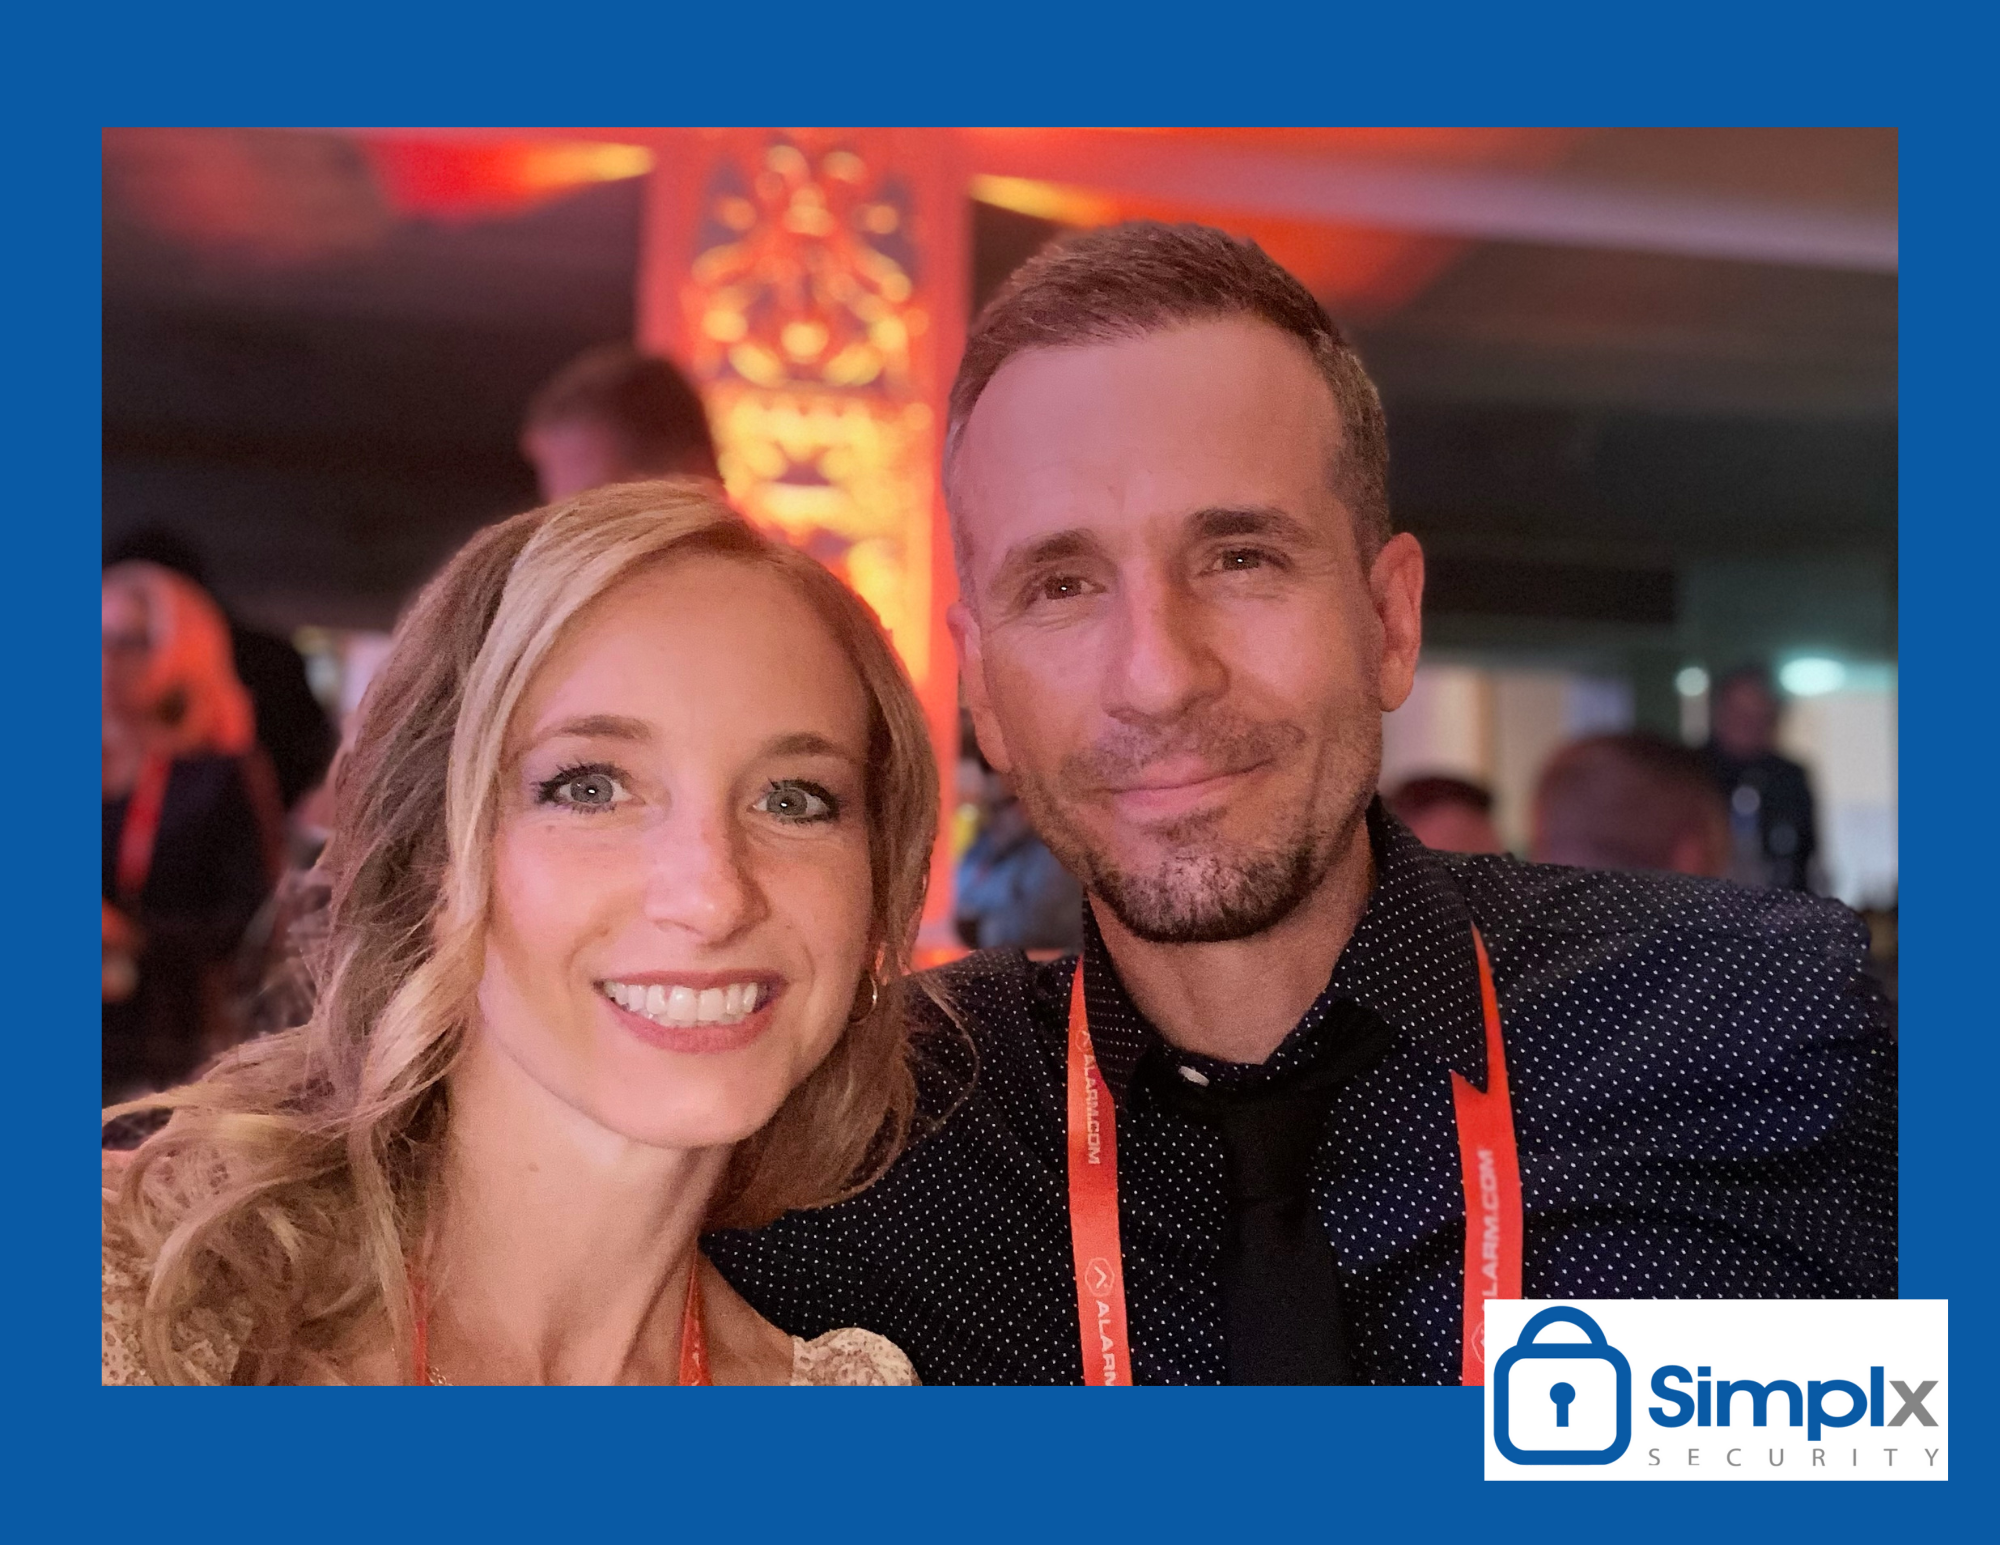 Simplx owners Nate & Tara Routsong at the 2023 Alarm.com convention.